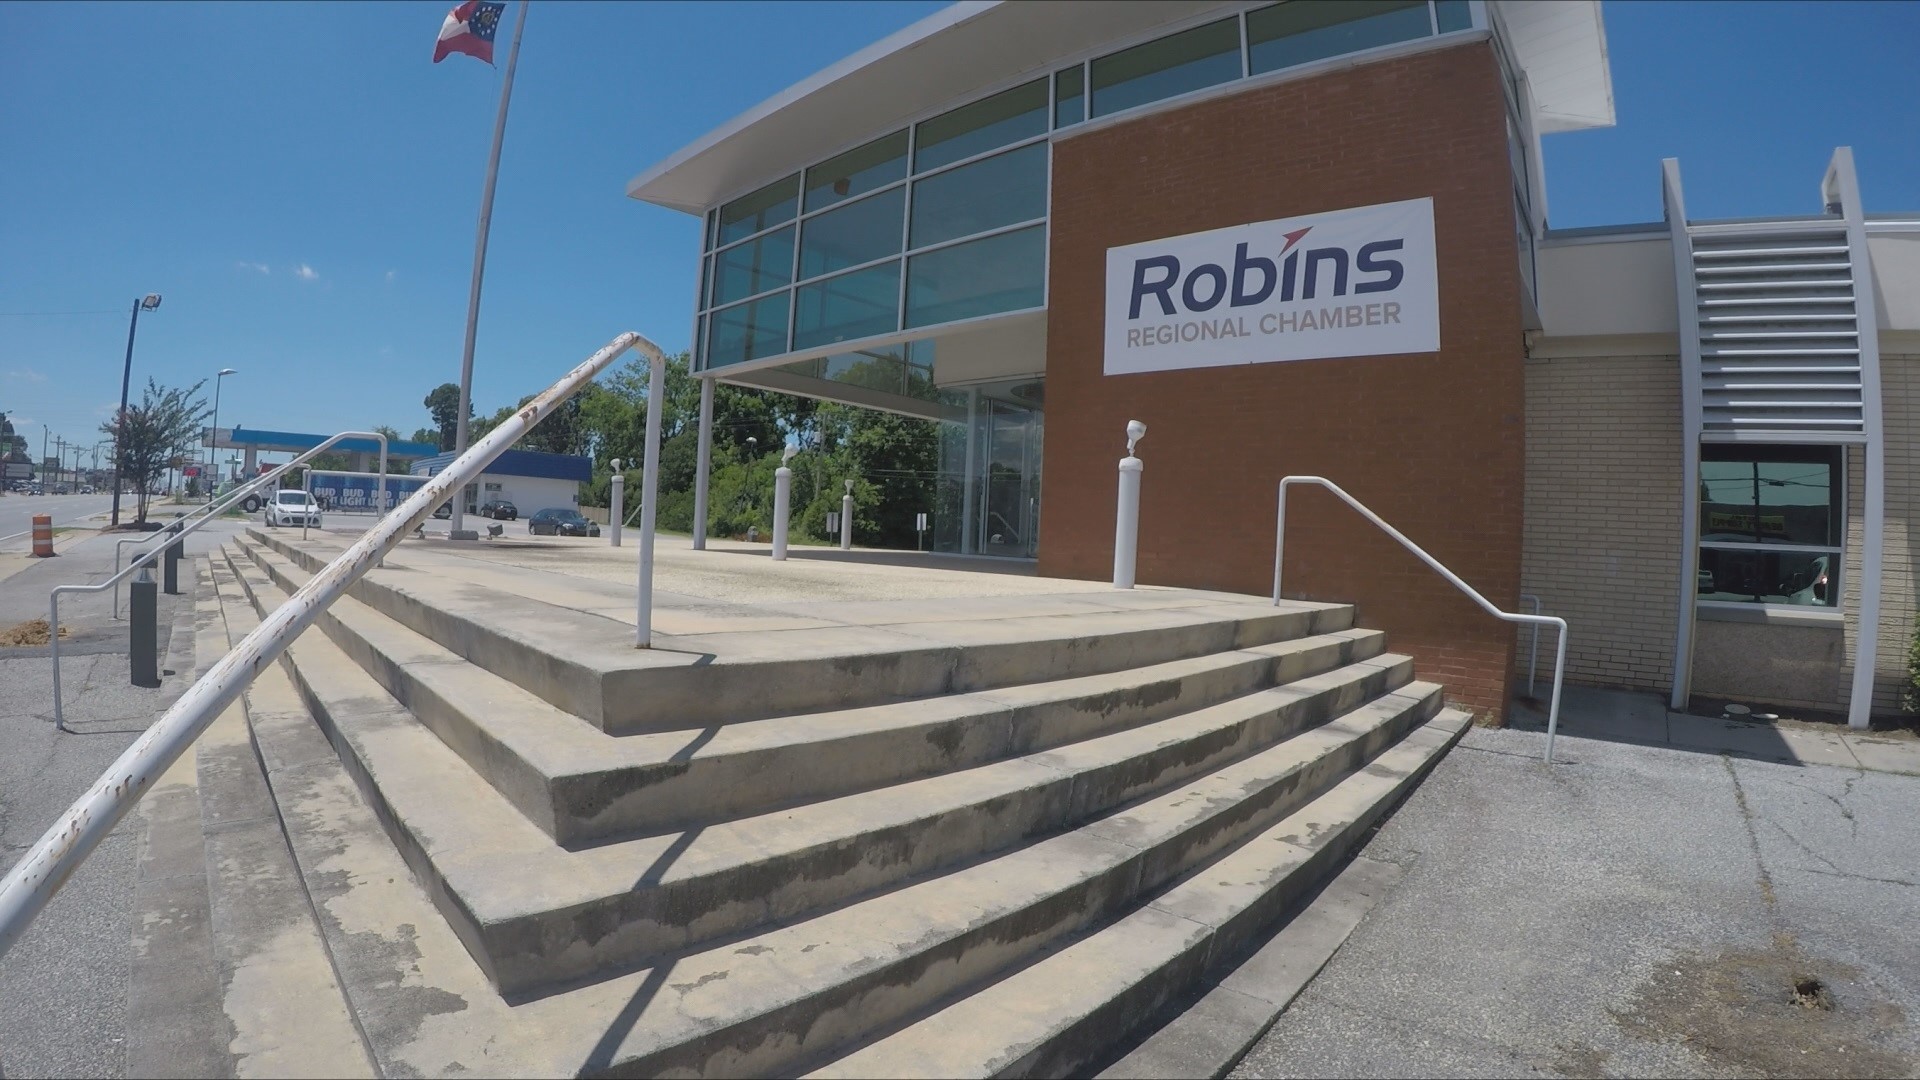 The Robins Regional Chamber of Commerce released the 'Robins Strong' website to provide resources and help small businesses stay afloat